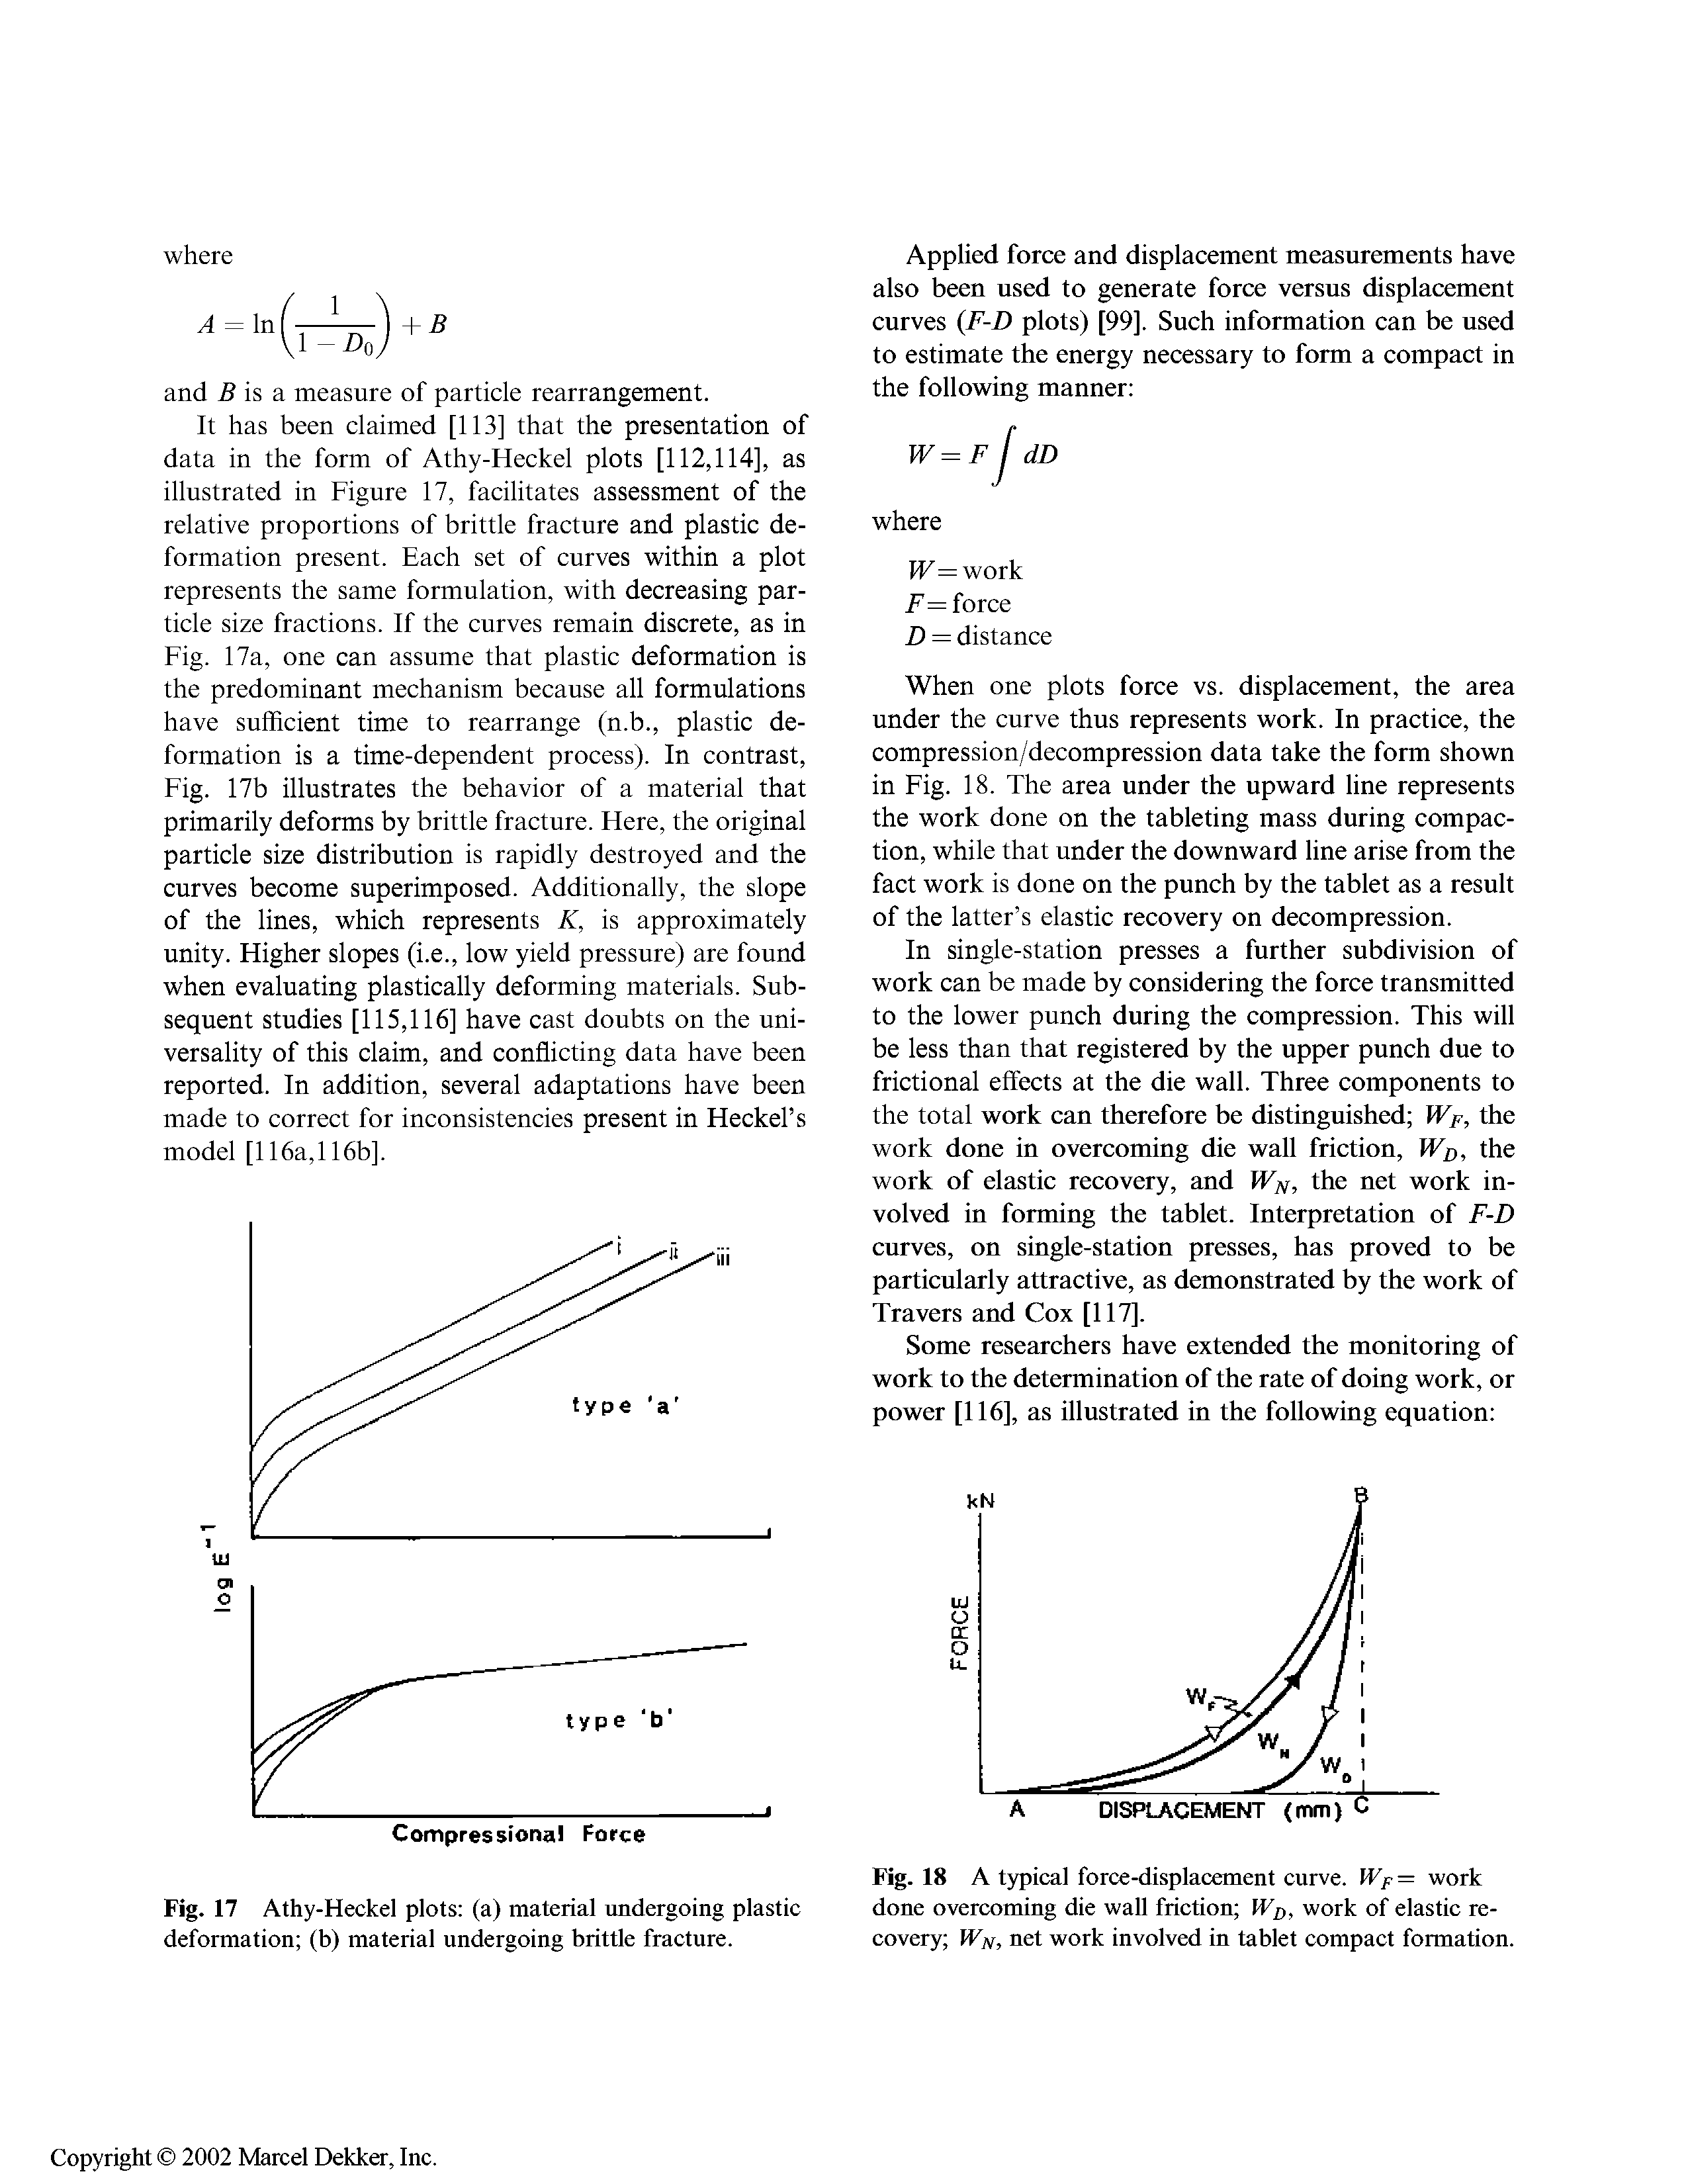 Fig. 18 A typical force-displacement curve. WF= work done overcoming die wall friction WD, work of elastic recovery Wp/, net work involved in tablet compact formation.